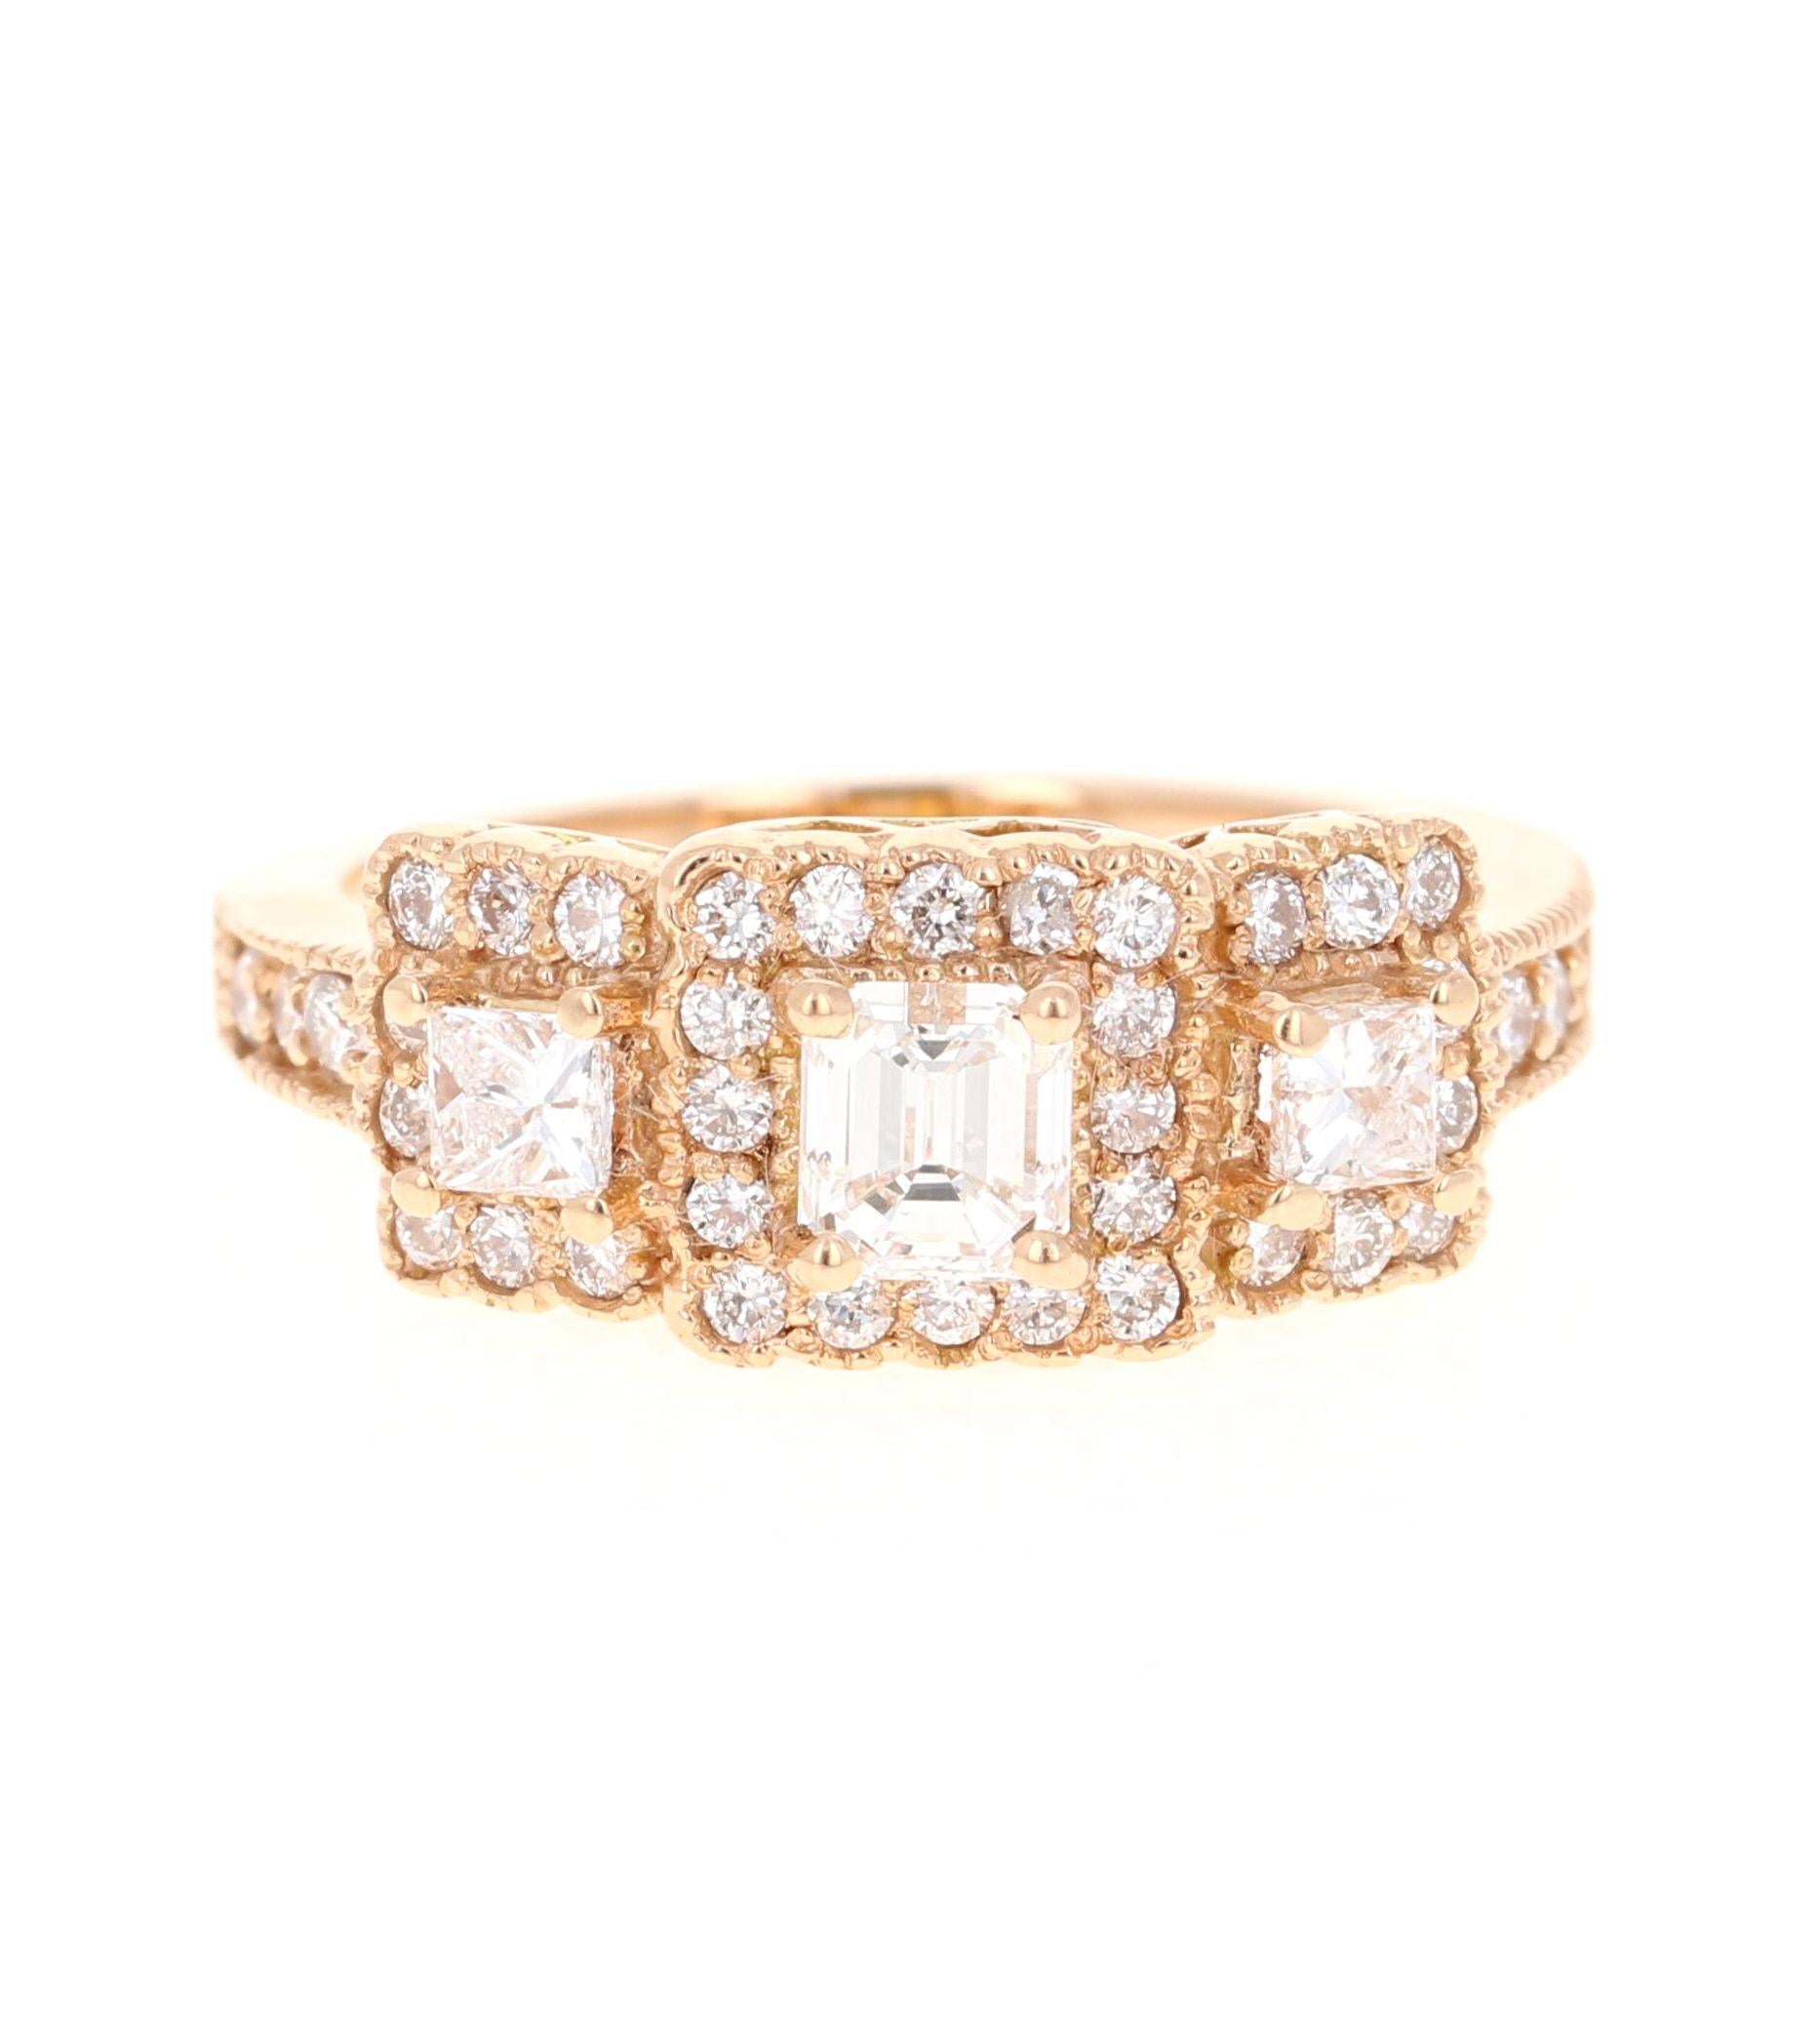 A beautiful 3-stone Diamond ring set in Rose Gold.

The center diamond is a Radiant Cut Diamond and weighs 0.53 carats. The clarity and color of the center diamond is VS-F. Adjacent to the center diamond are 2 Princess Cut Diamonds weighing 0.29